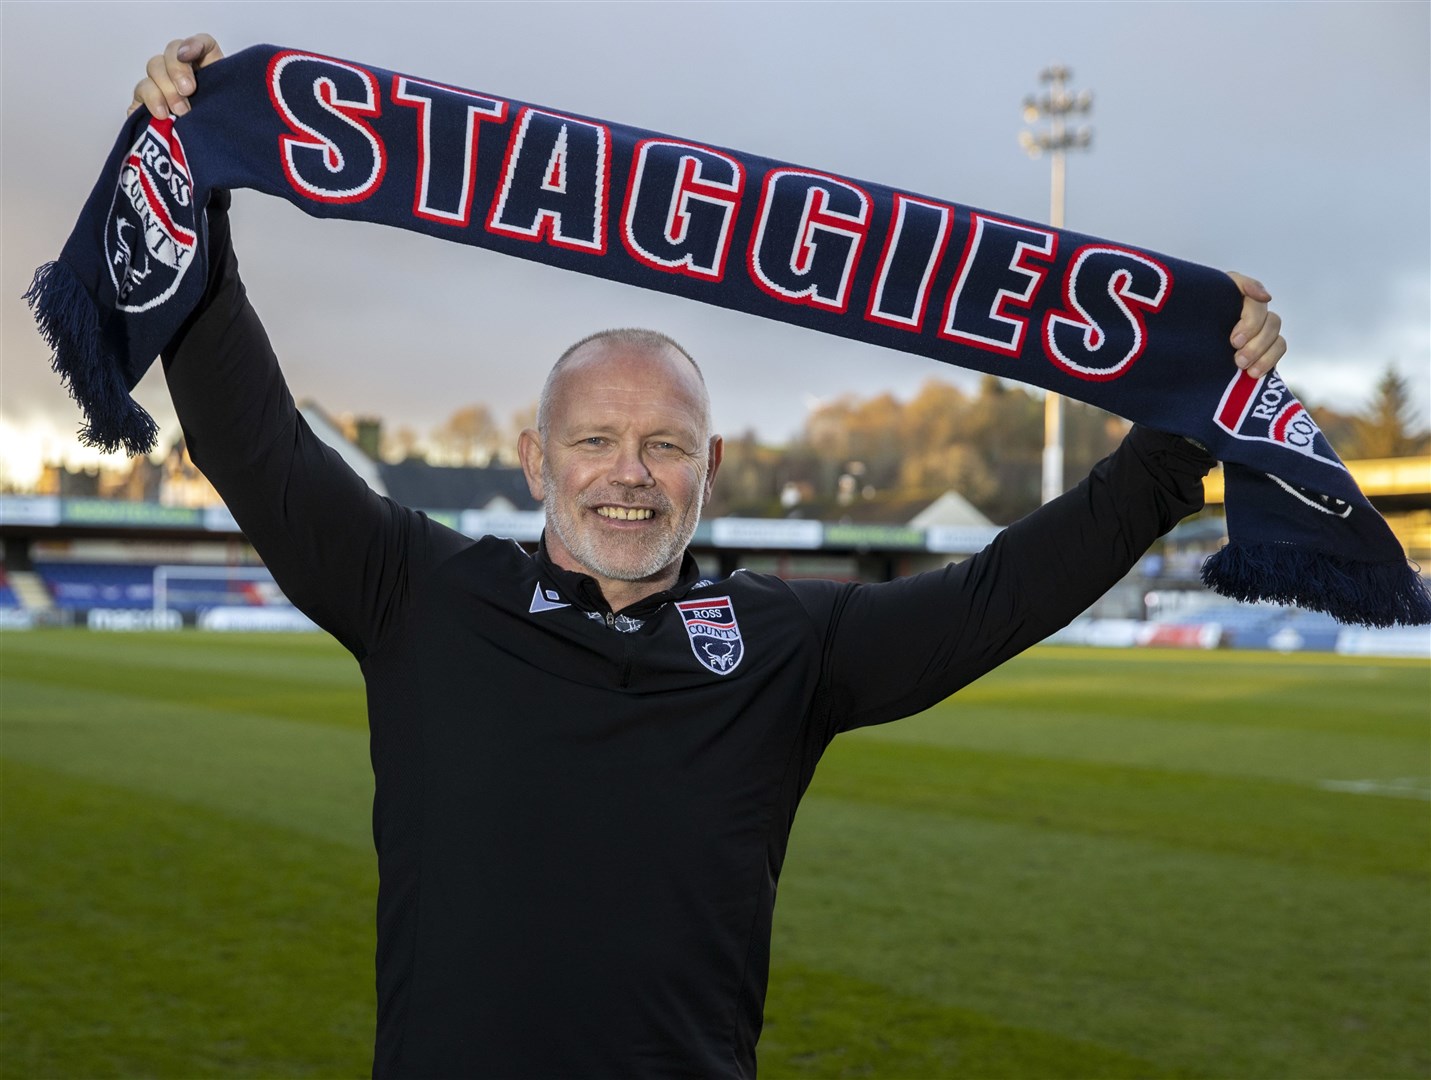 John Hughes suffers defeat in first game as Ross County manager.